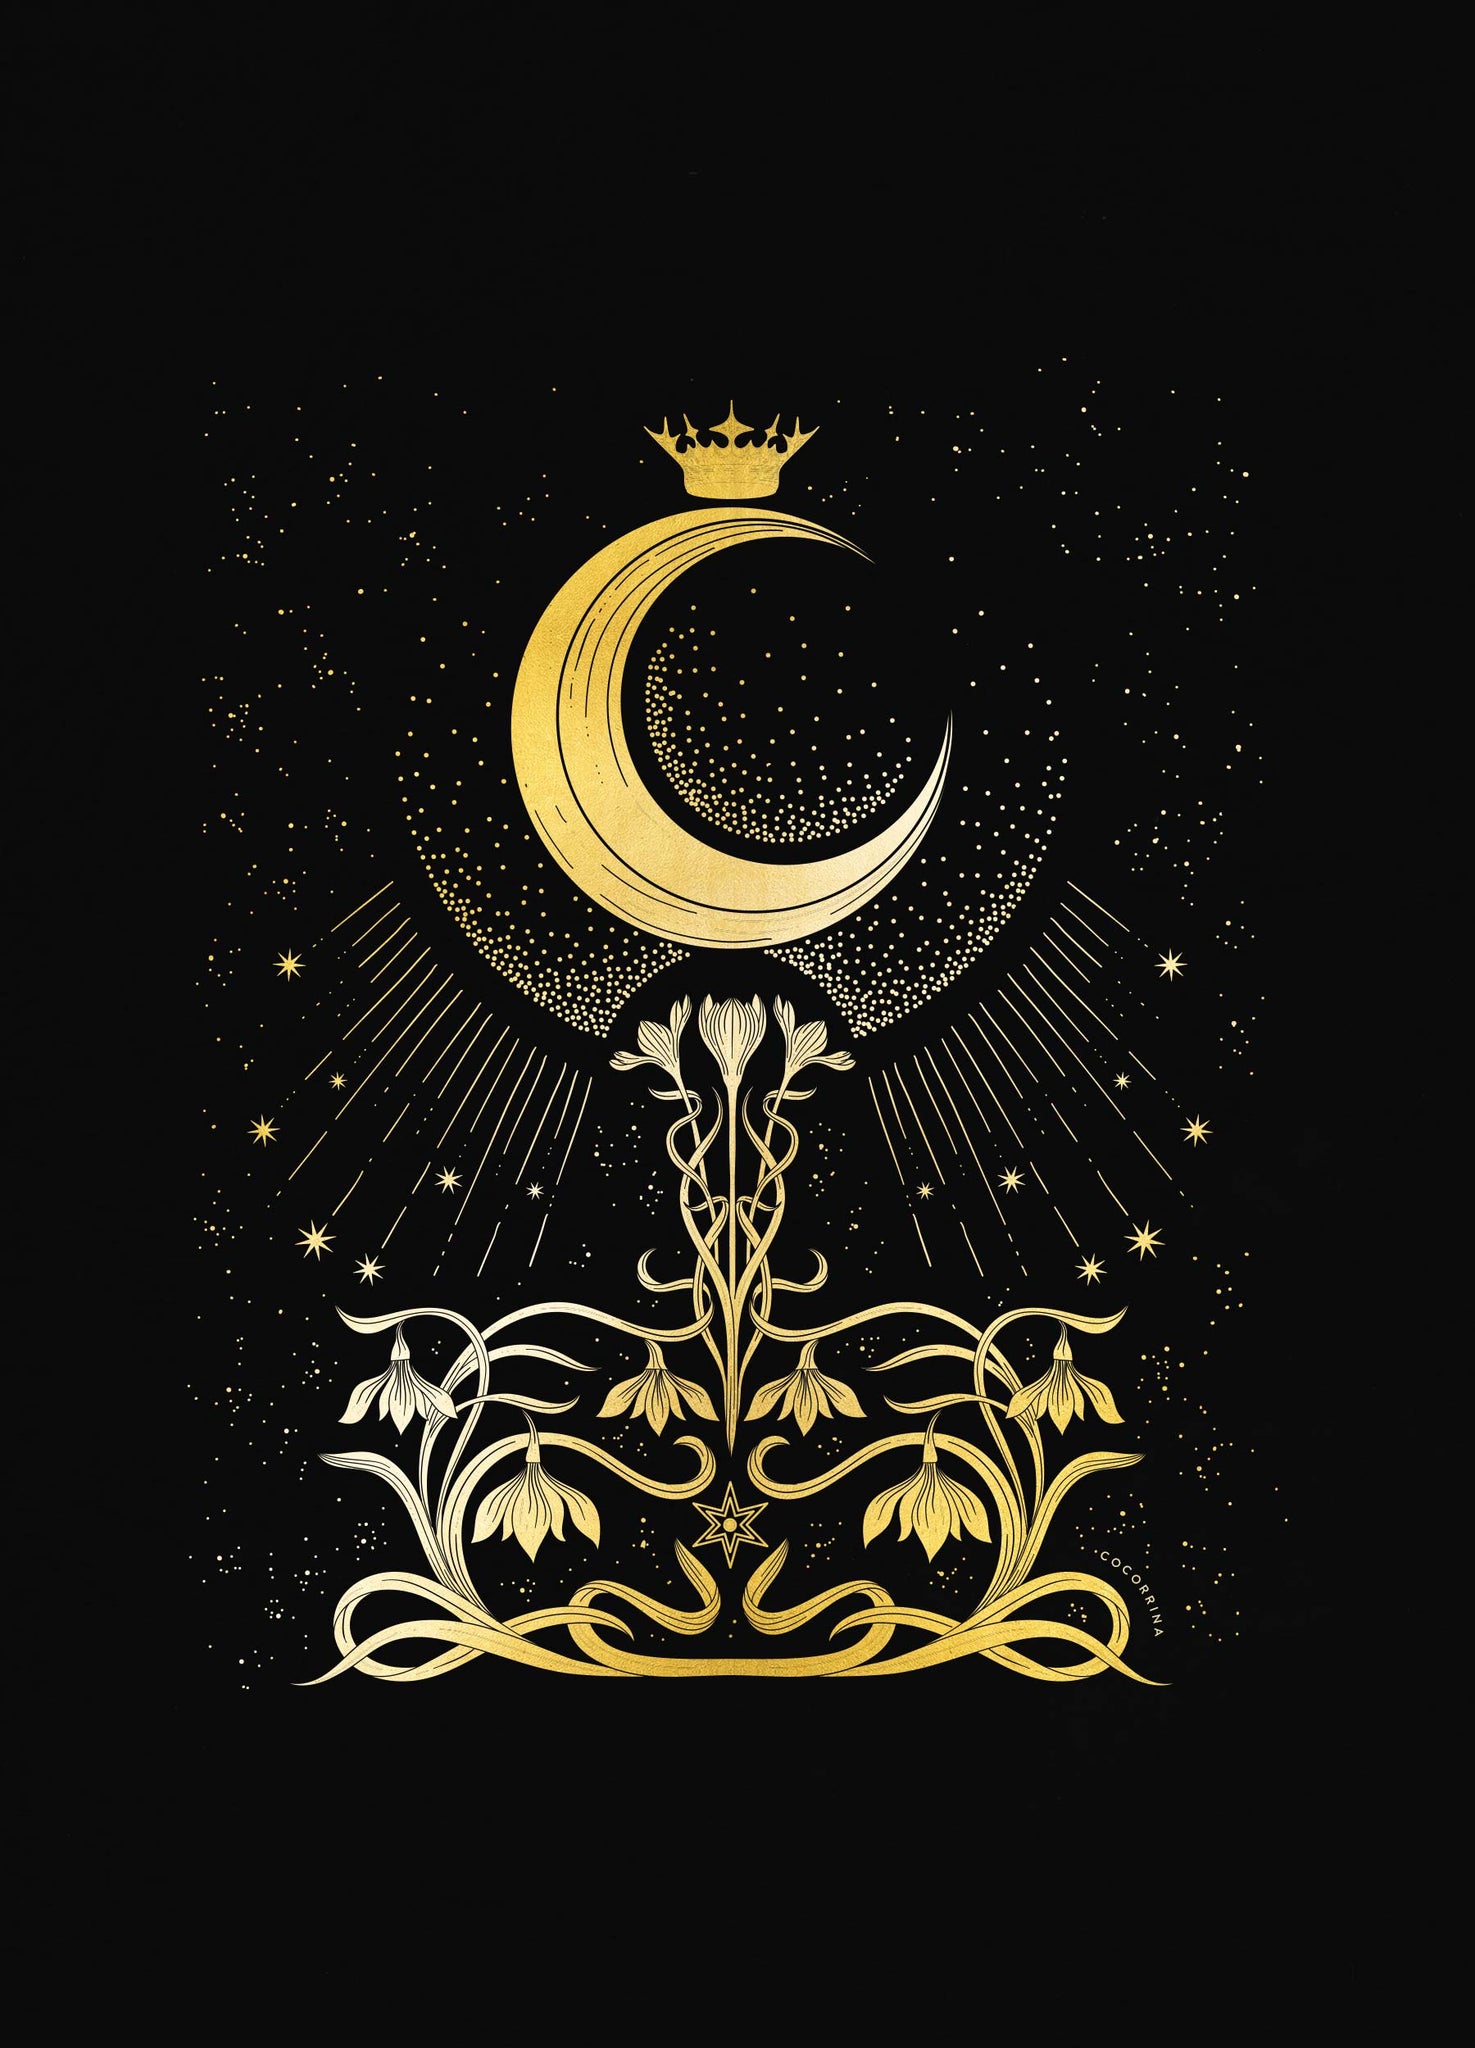 Moonlight Aroma, with flowers - the Lady of the Night Moon gold foil art print on black paper by Cocorrina & Co